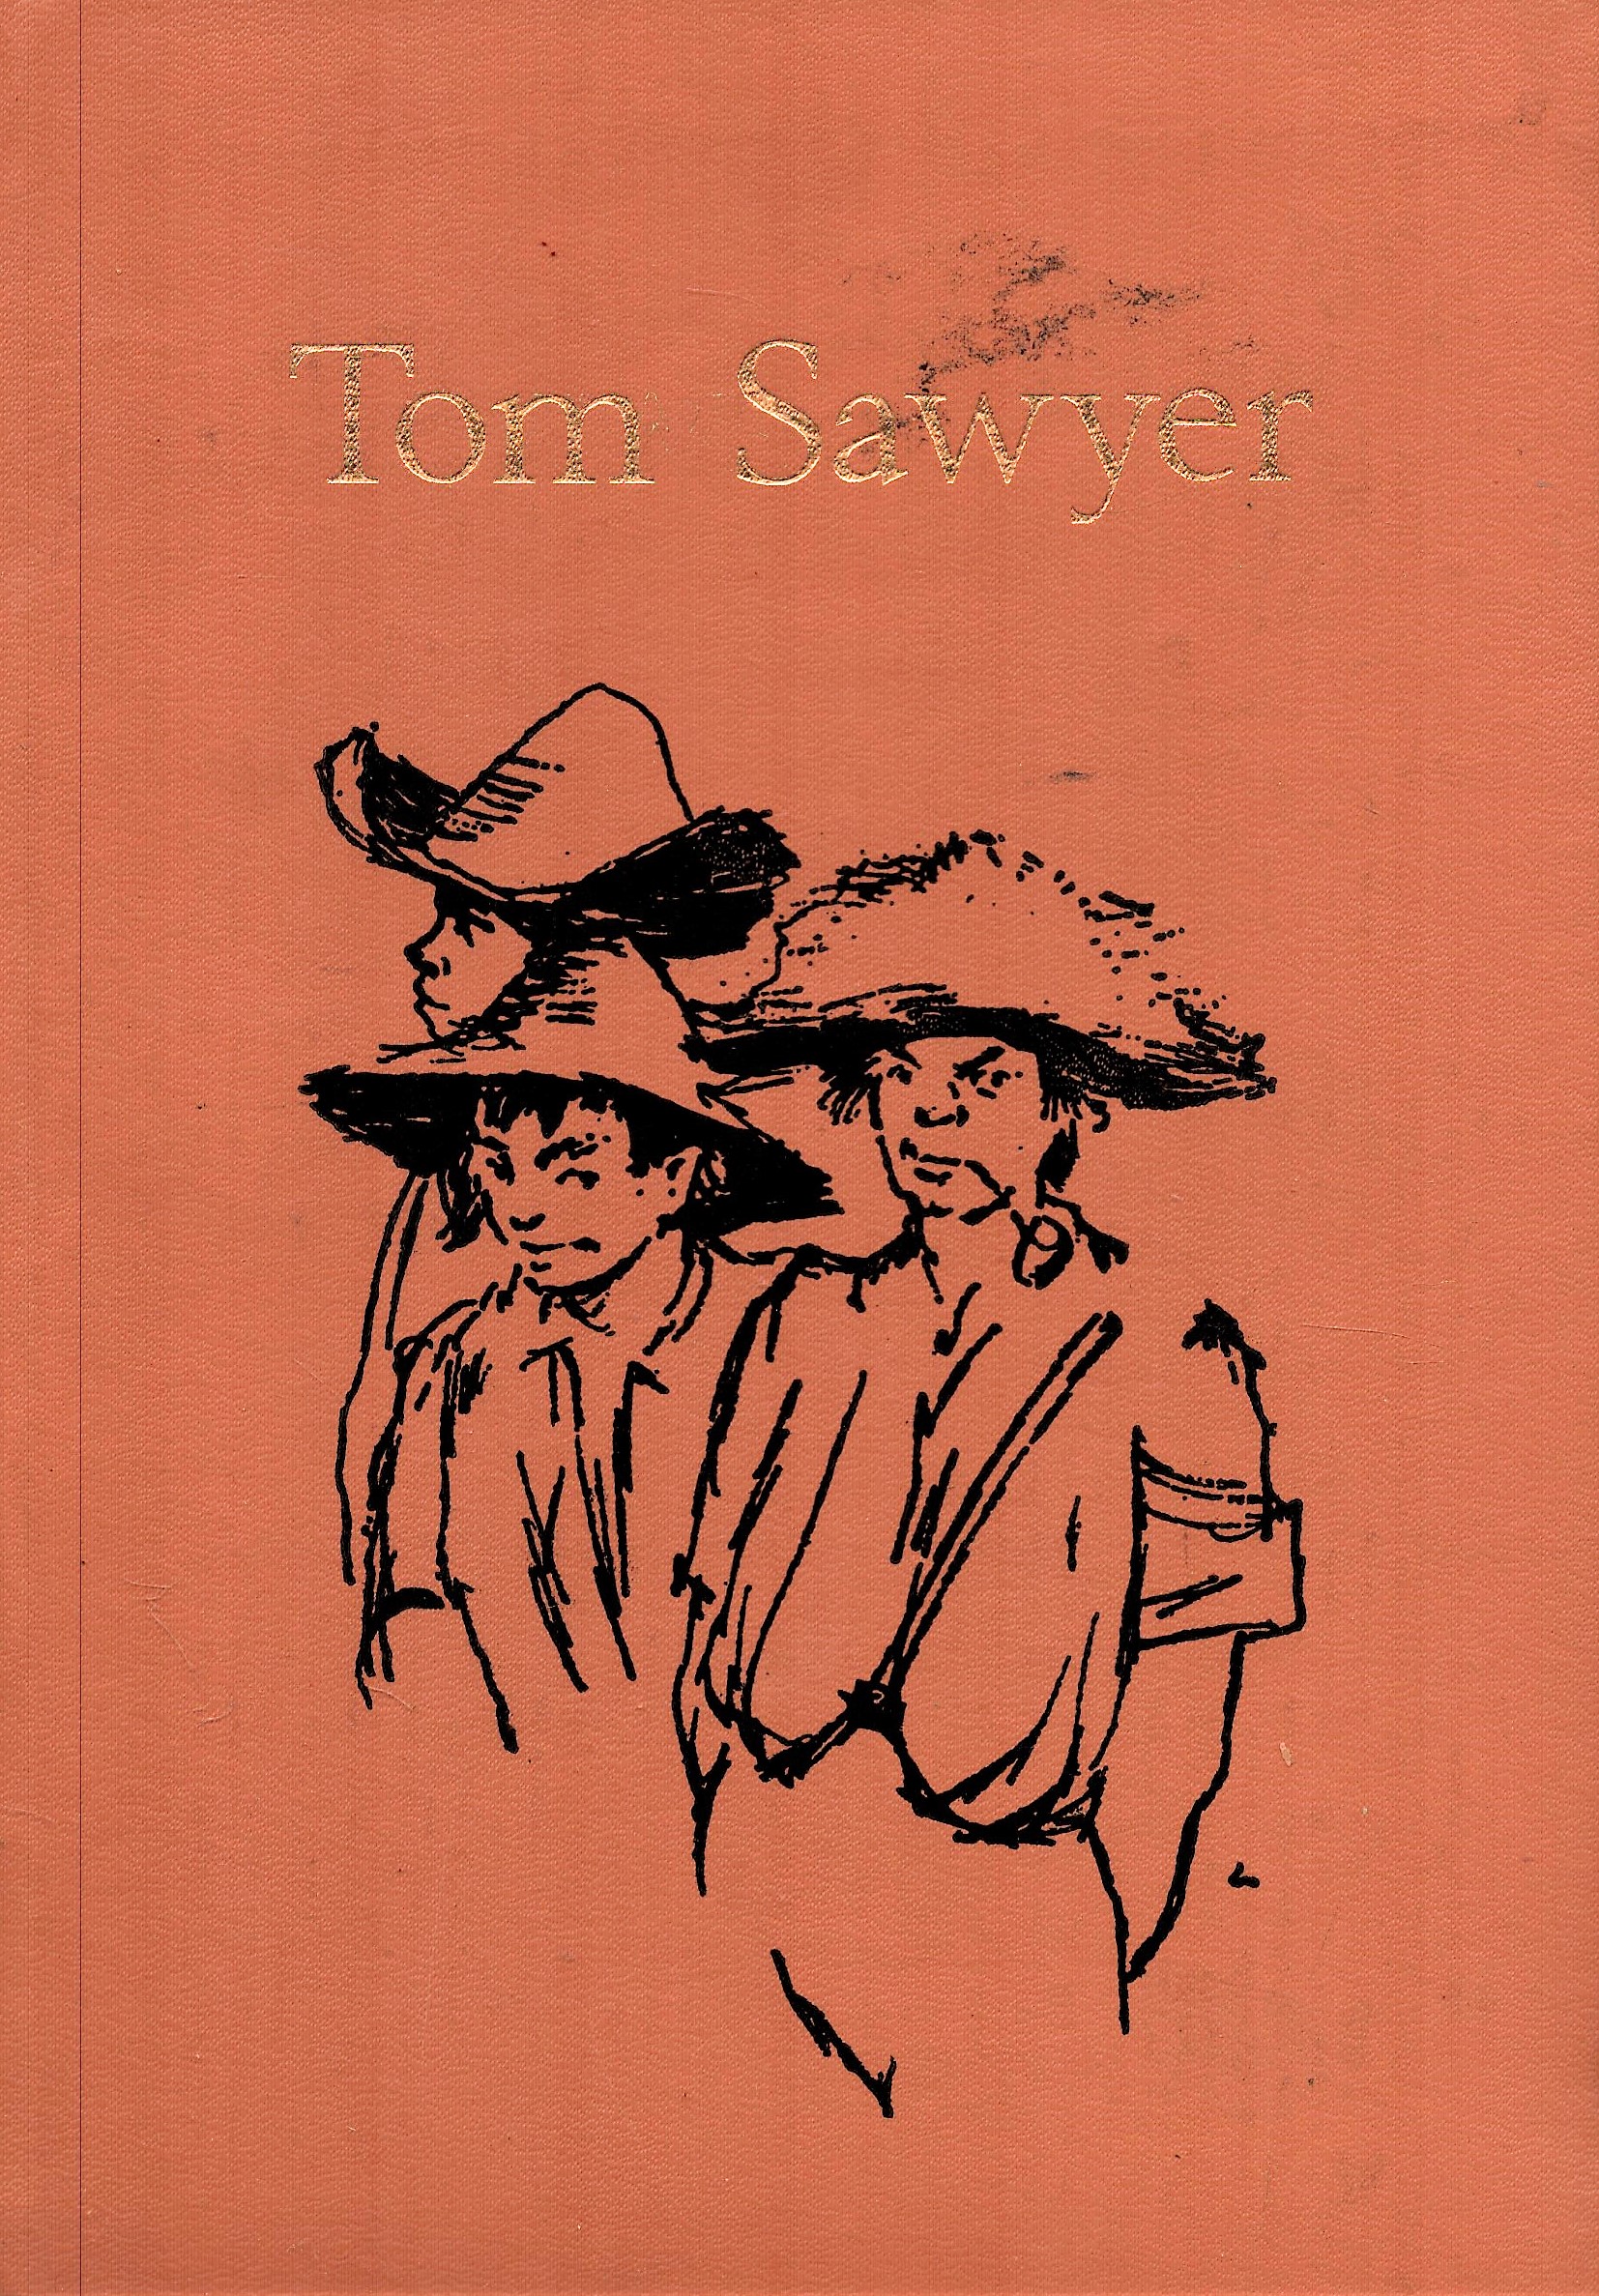 The Adventures of Tom Sawyer by Mark Twain Hardback Book 1968 Fifth Edition published by